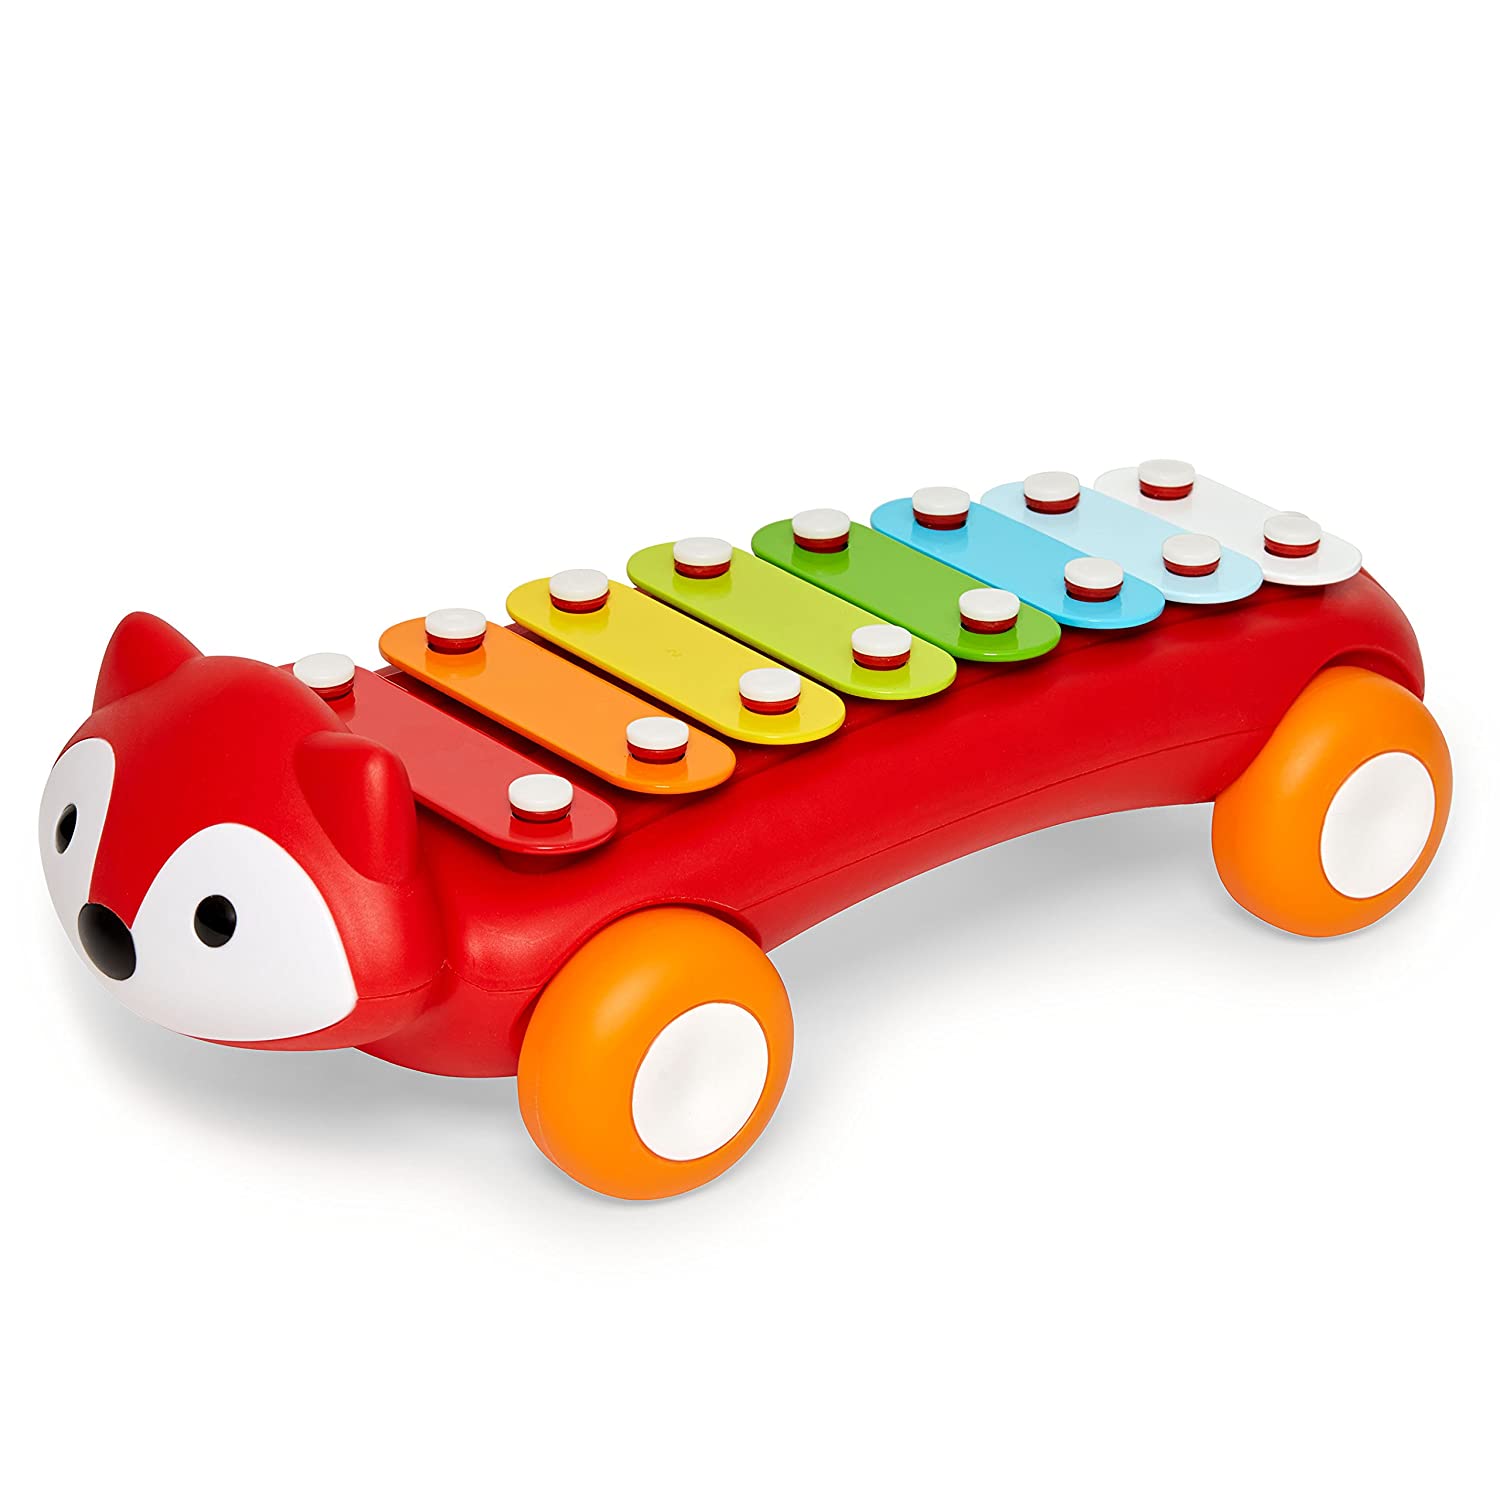 7 Best Babies Xylophone 2023 - Buying Guide & Reviews 4